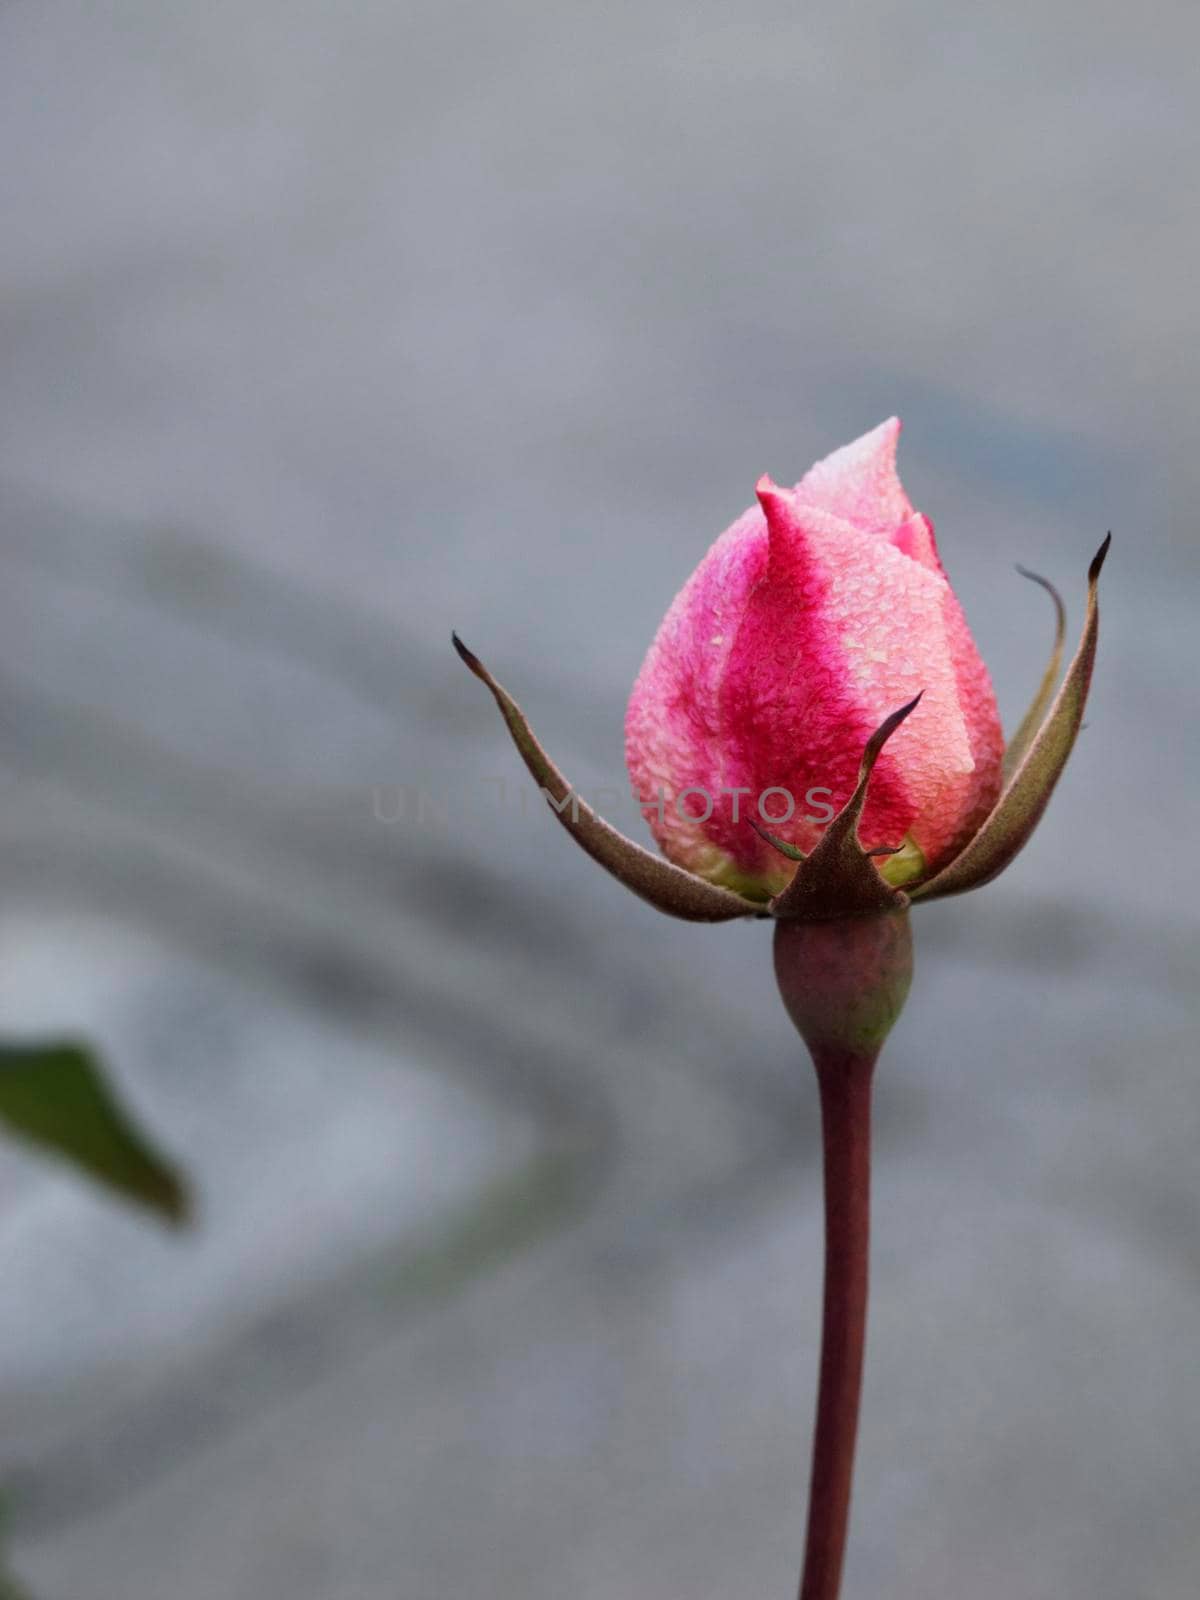 Rosebud close up ,color gradiations from red to pink ,long stem ,background gray and out of focus ,vertical composition